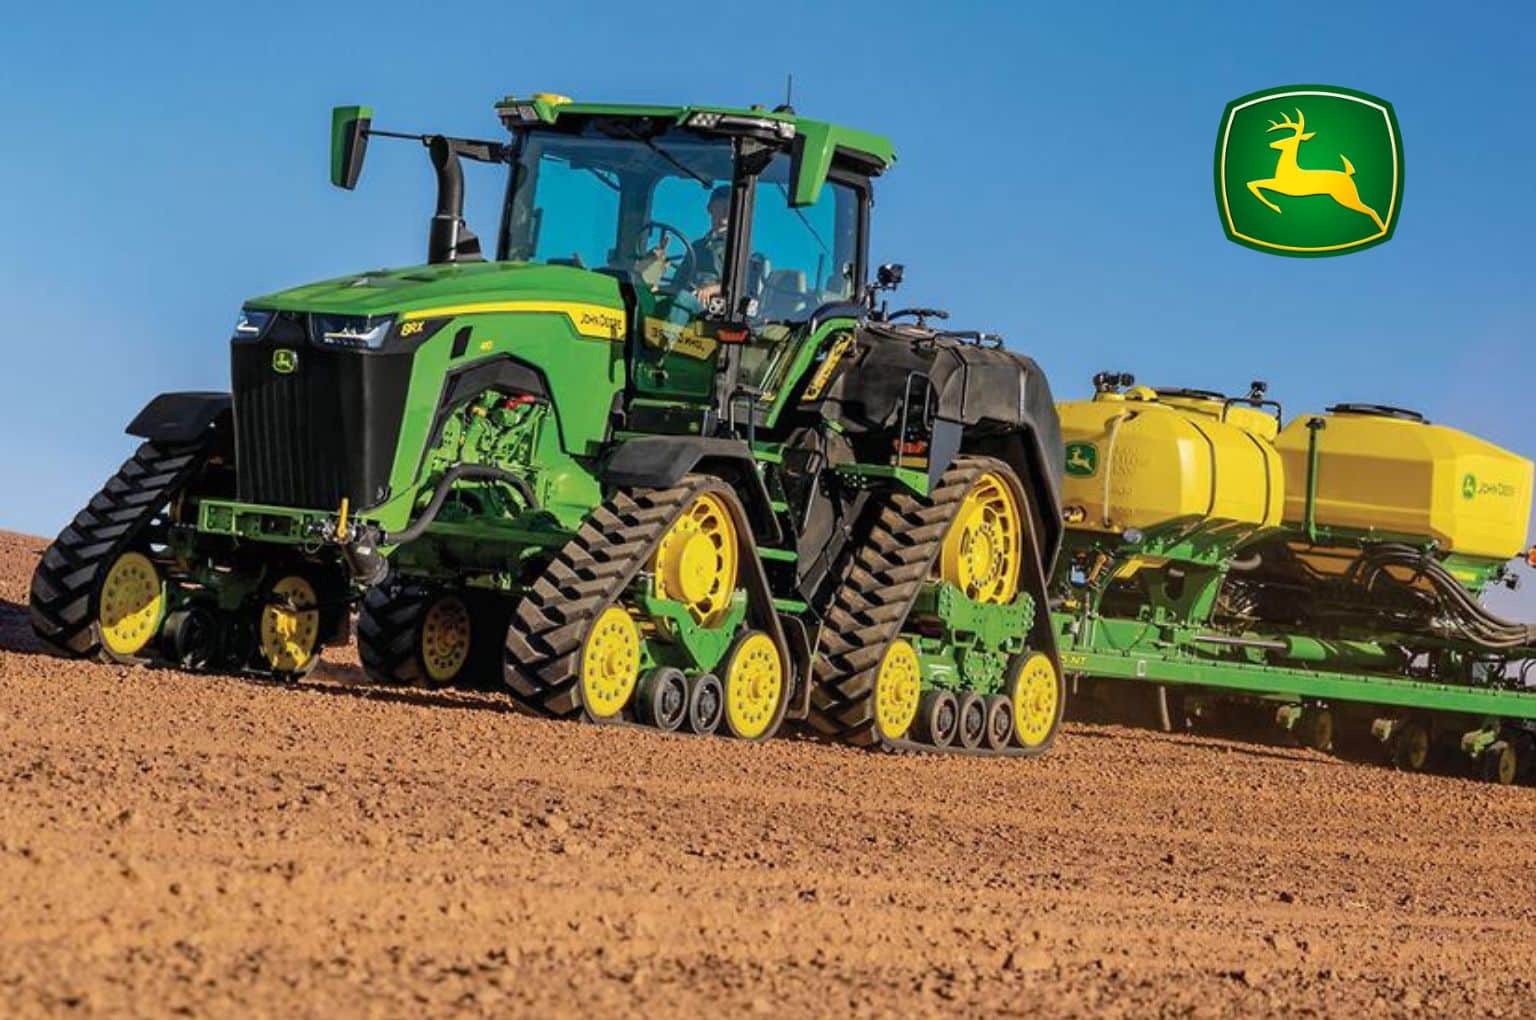 Deere & Co reports strong Q1 results